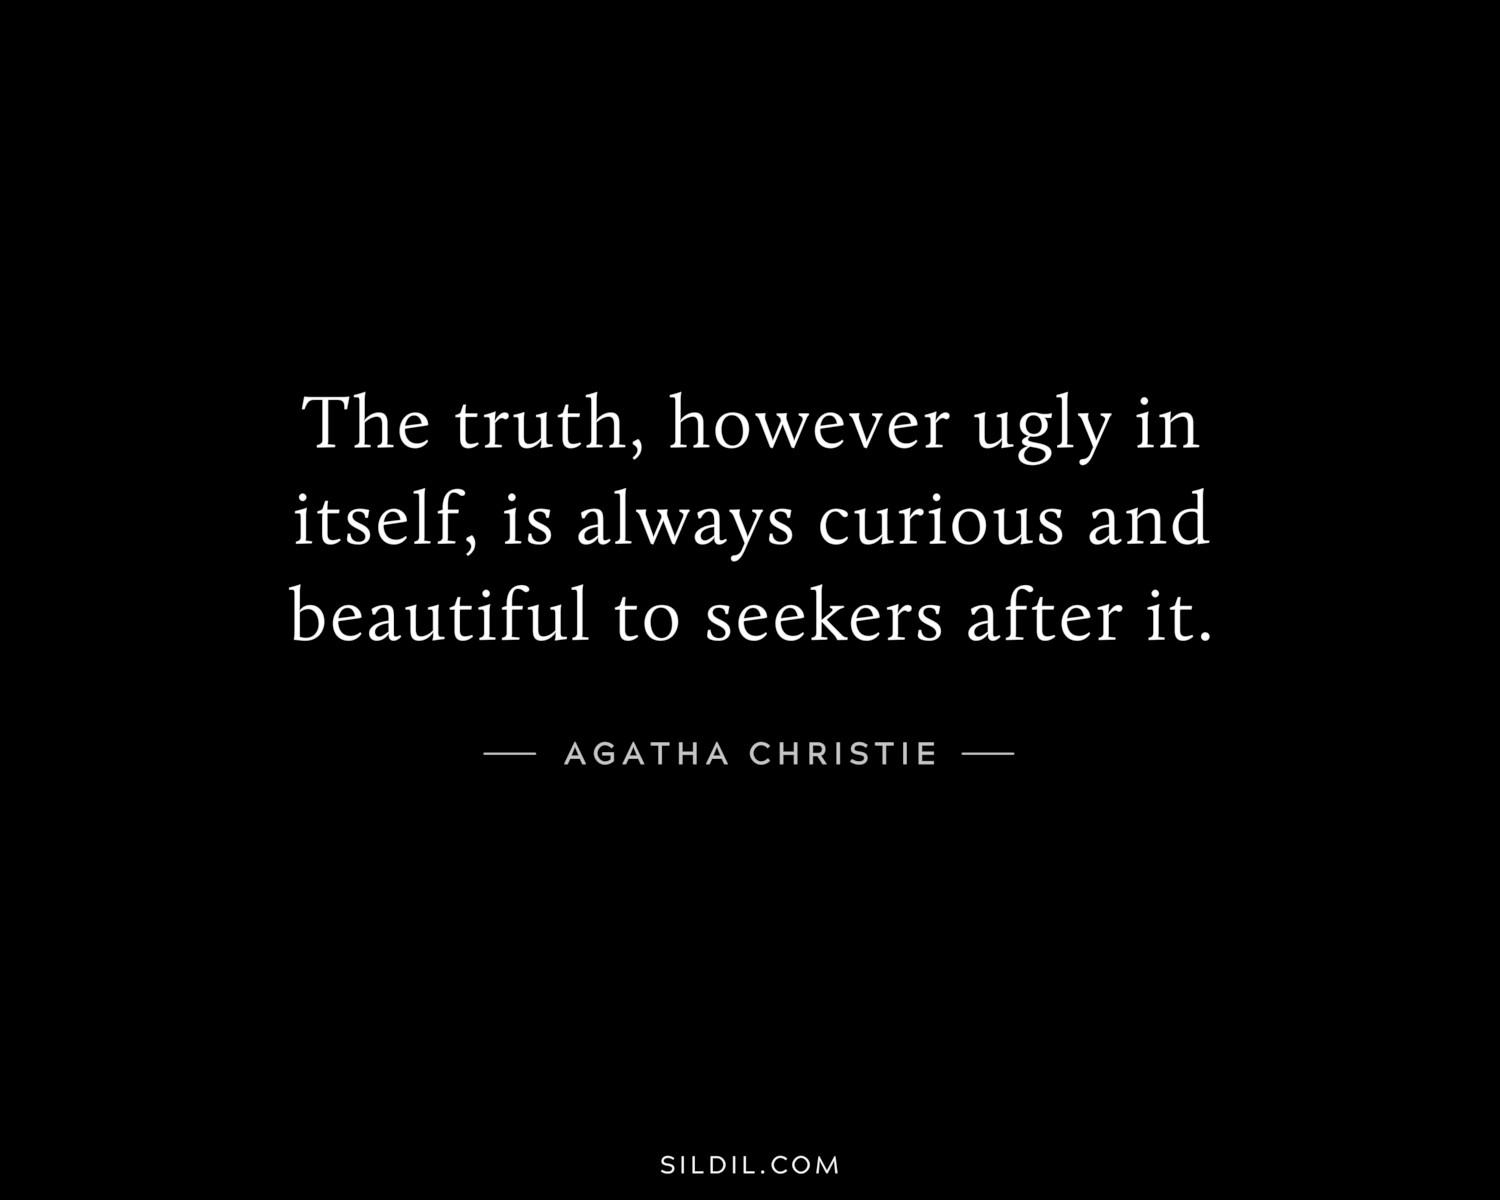 The truth, however ugly in itself, is always curious and beautiful to seekers after it.